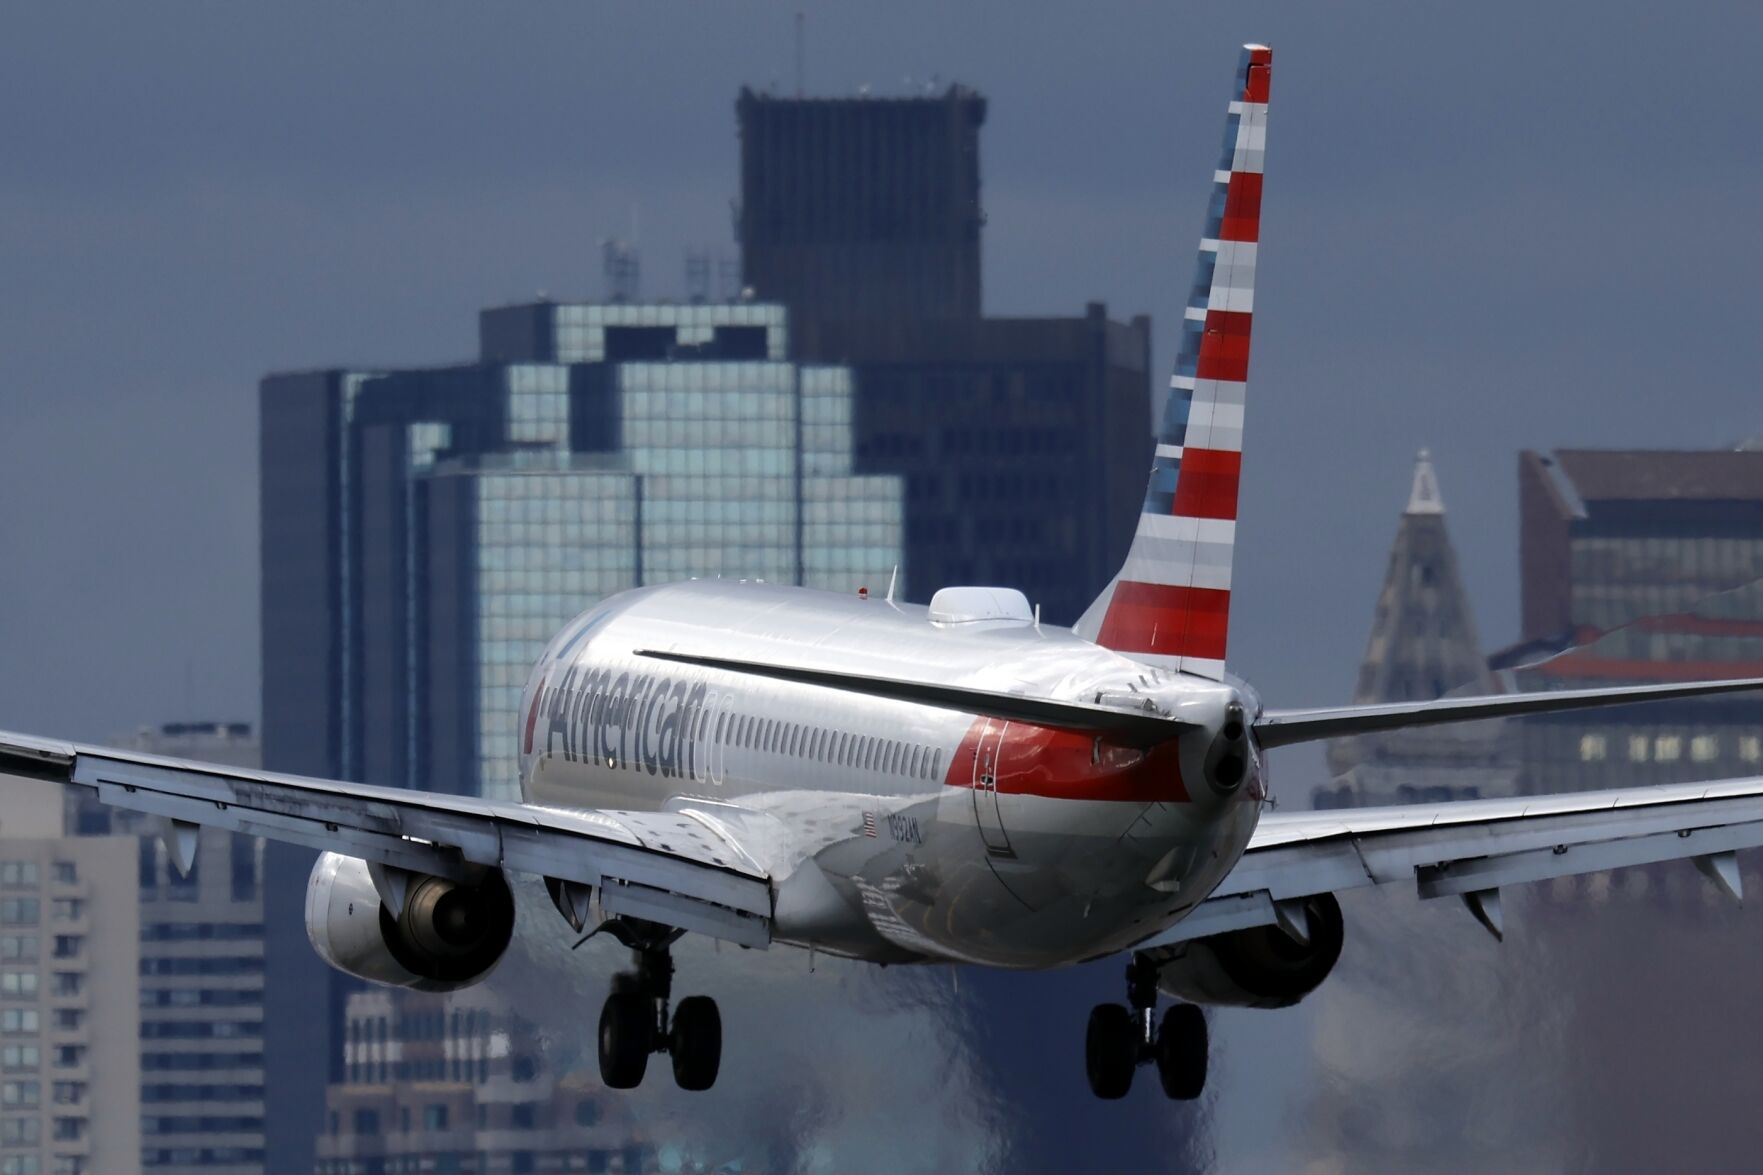 <p>File - An American Airlines plane lands at Logan International Airport, Thursday, Jan. 26, 2023, in Boston. American Airlines earnings are reported on Thursday. (AP Photo/Michael Dwyer, File)</p>   PHOTO CREDIT: Michael Dwyer